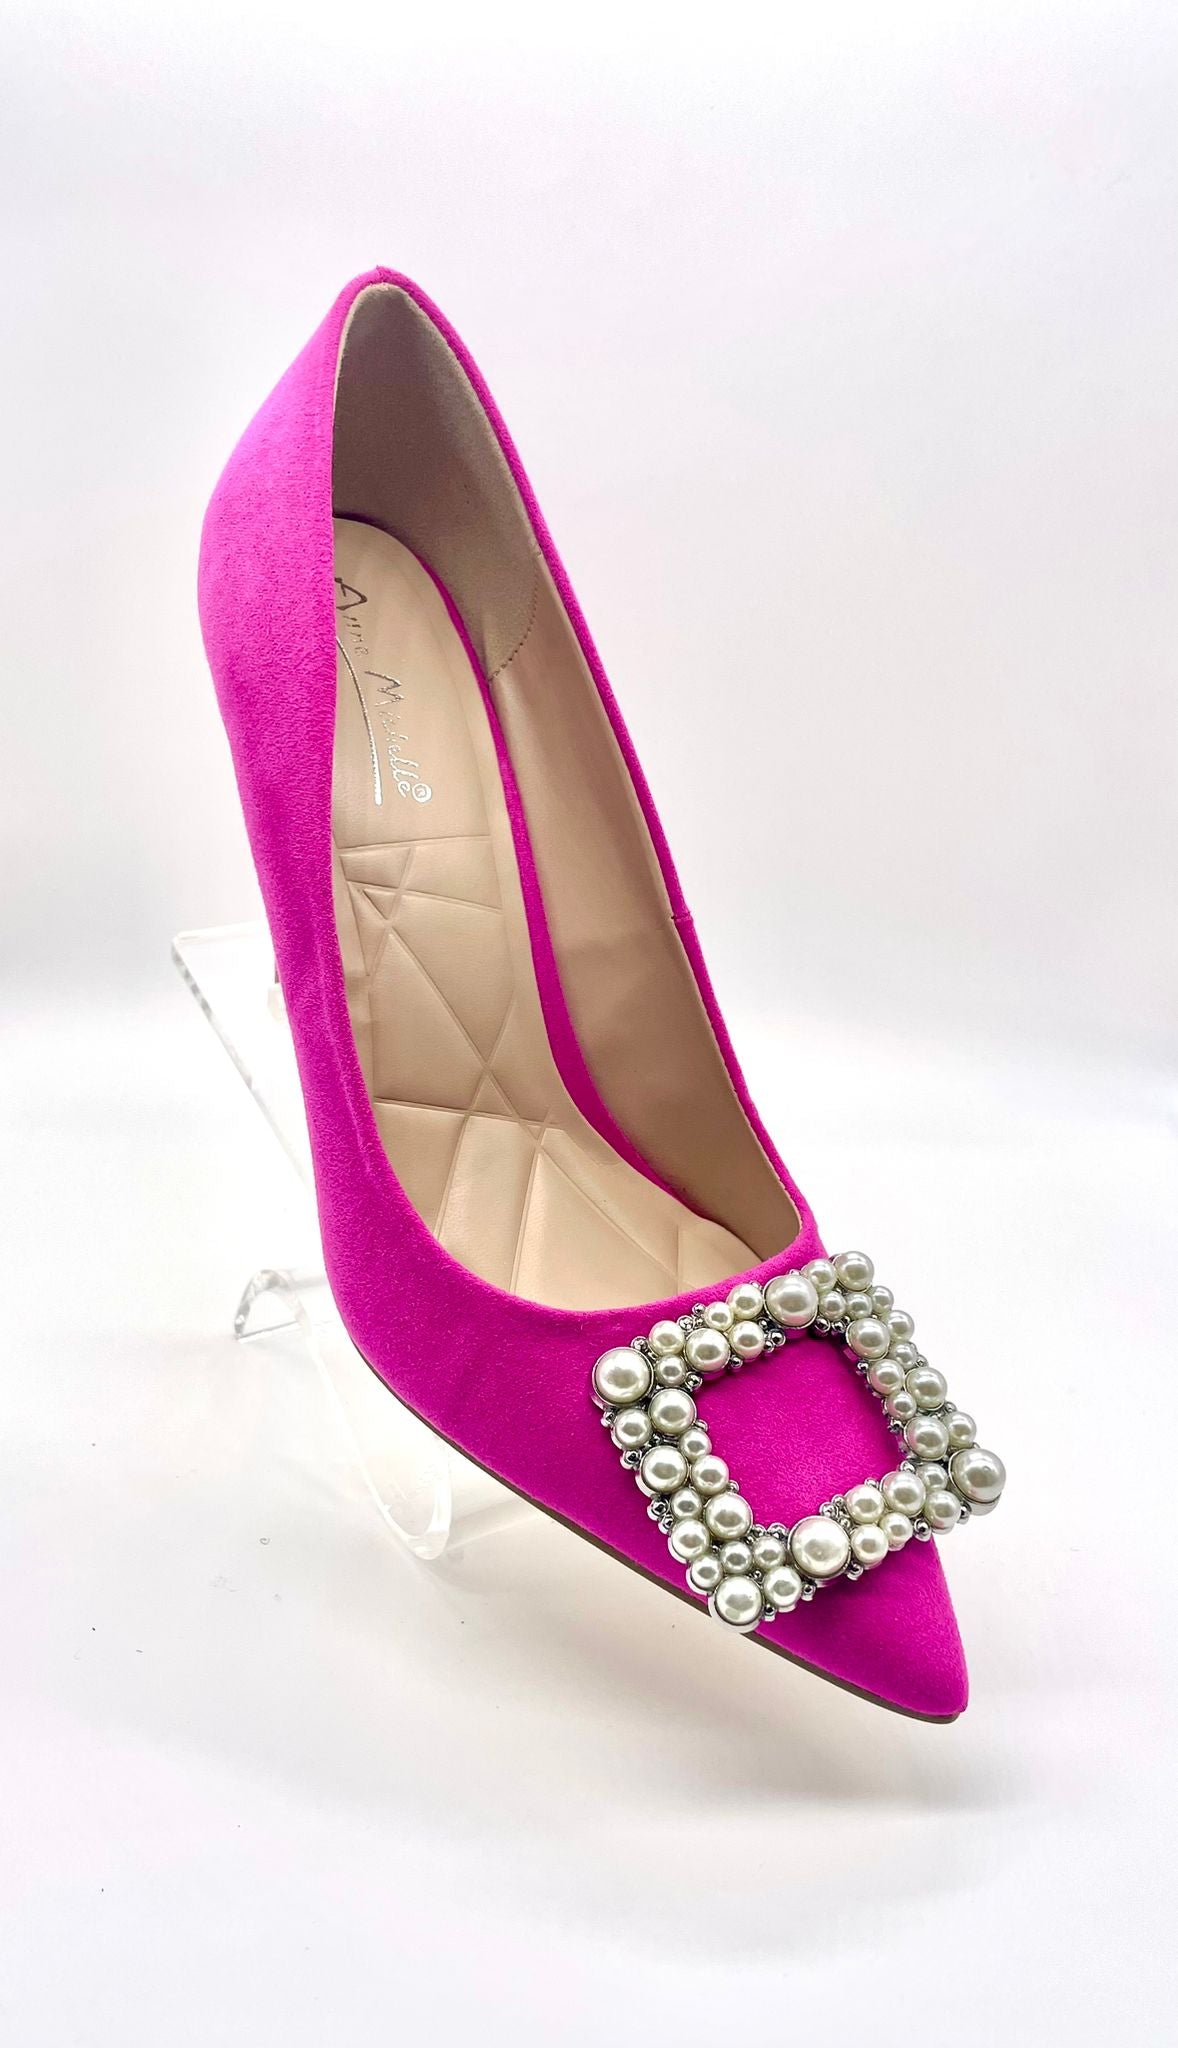 Colorful and Classy Stiletto Heels (Hot Pink)